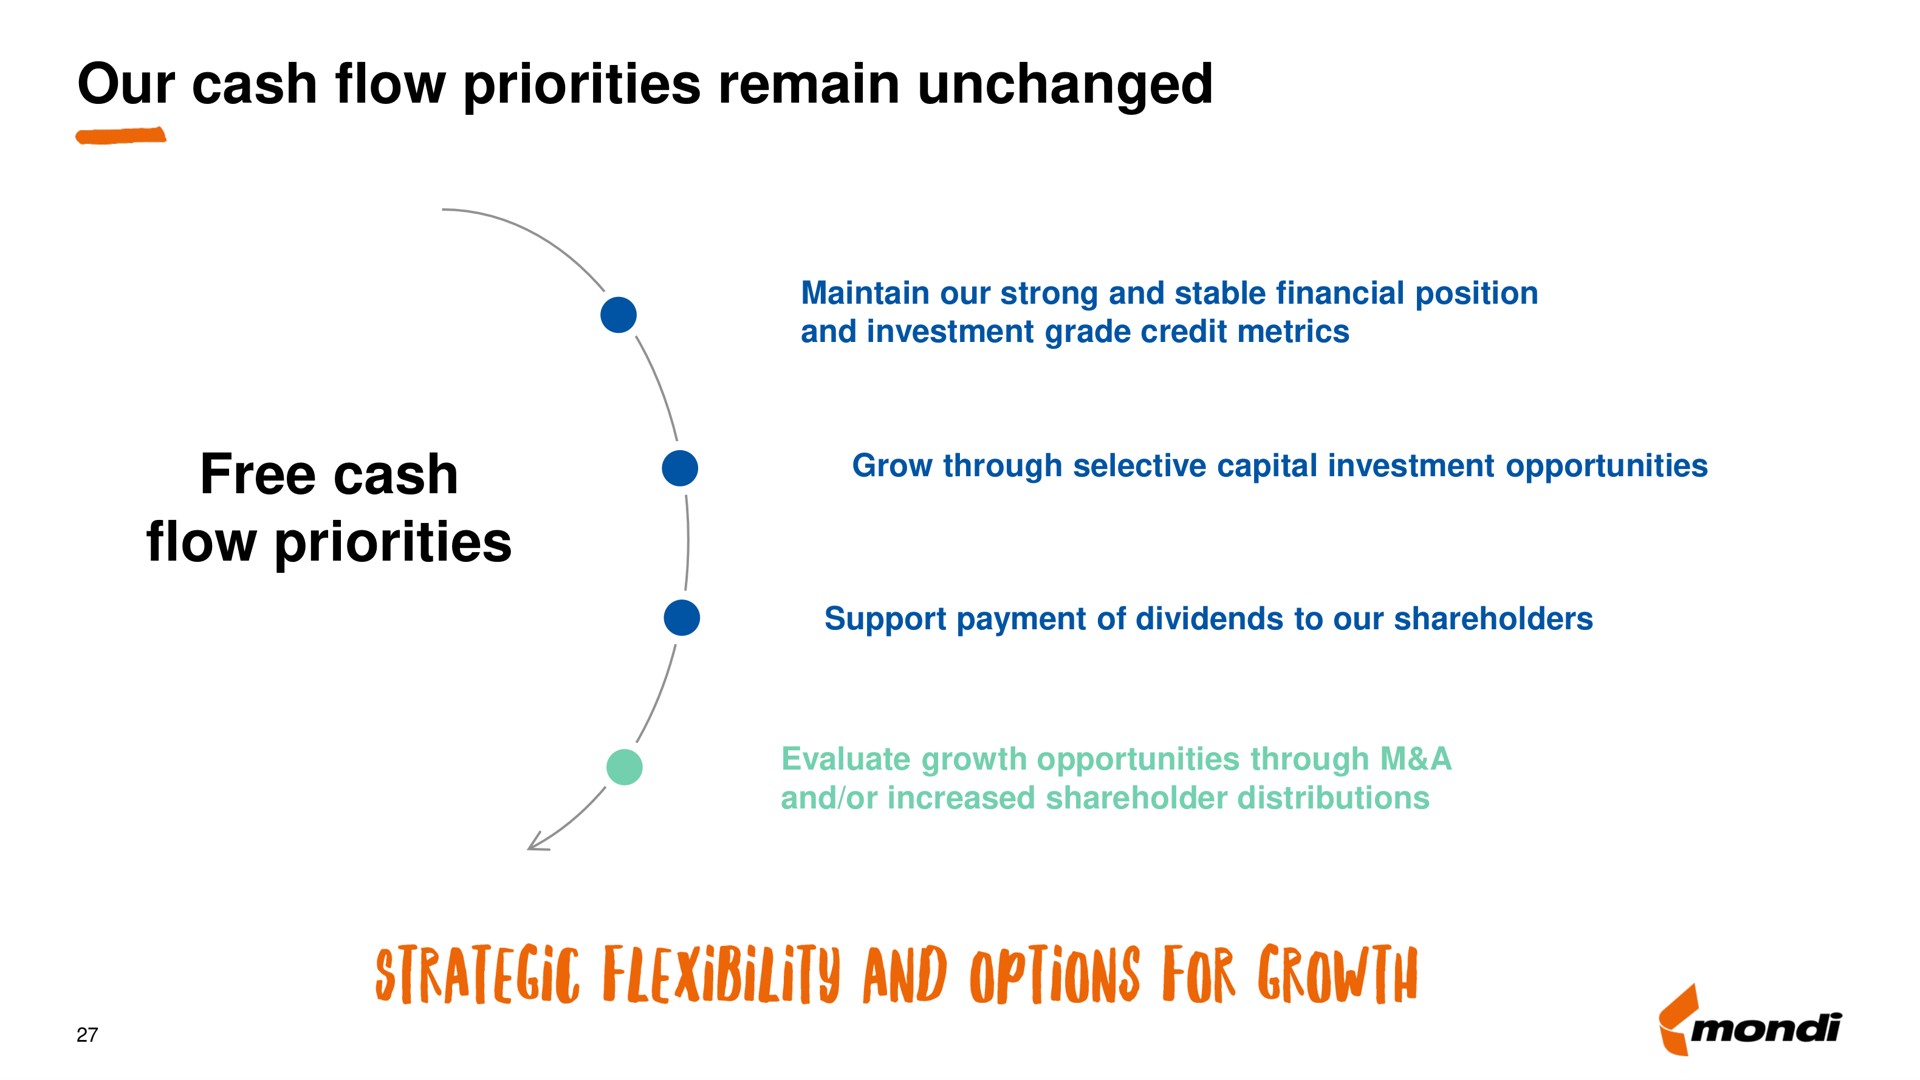 our cash flow priorities remain unchanged free cash flow priorities strategic flexibility and options for growth | Mondi